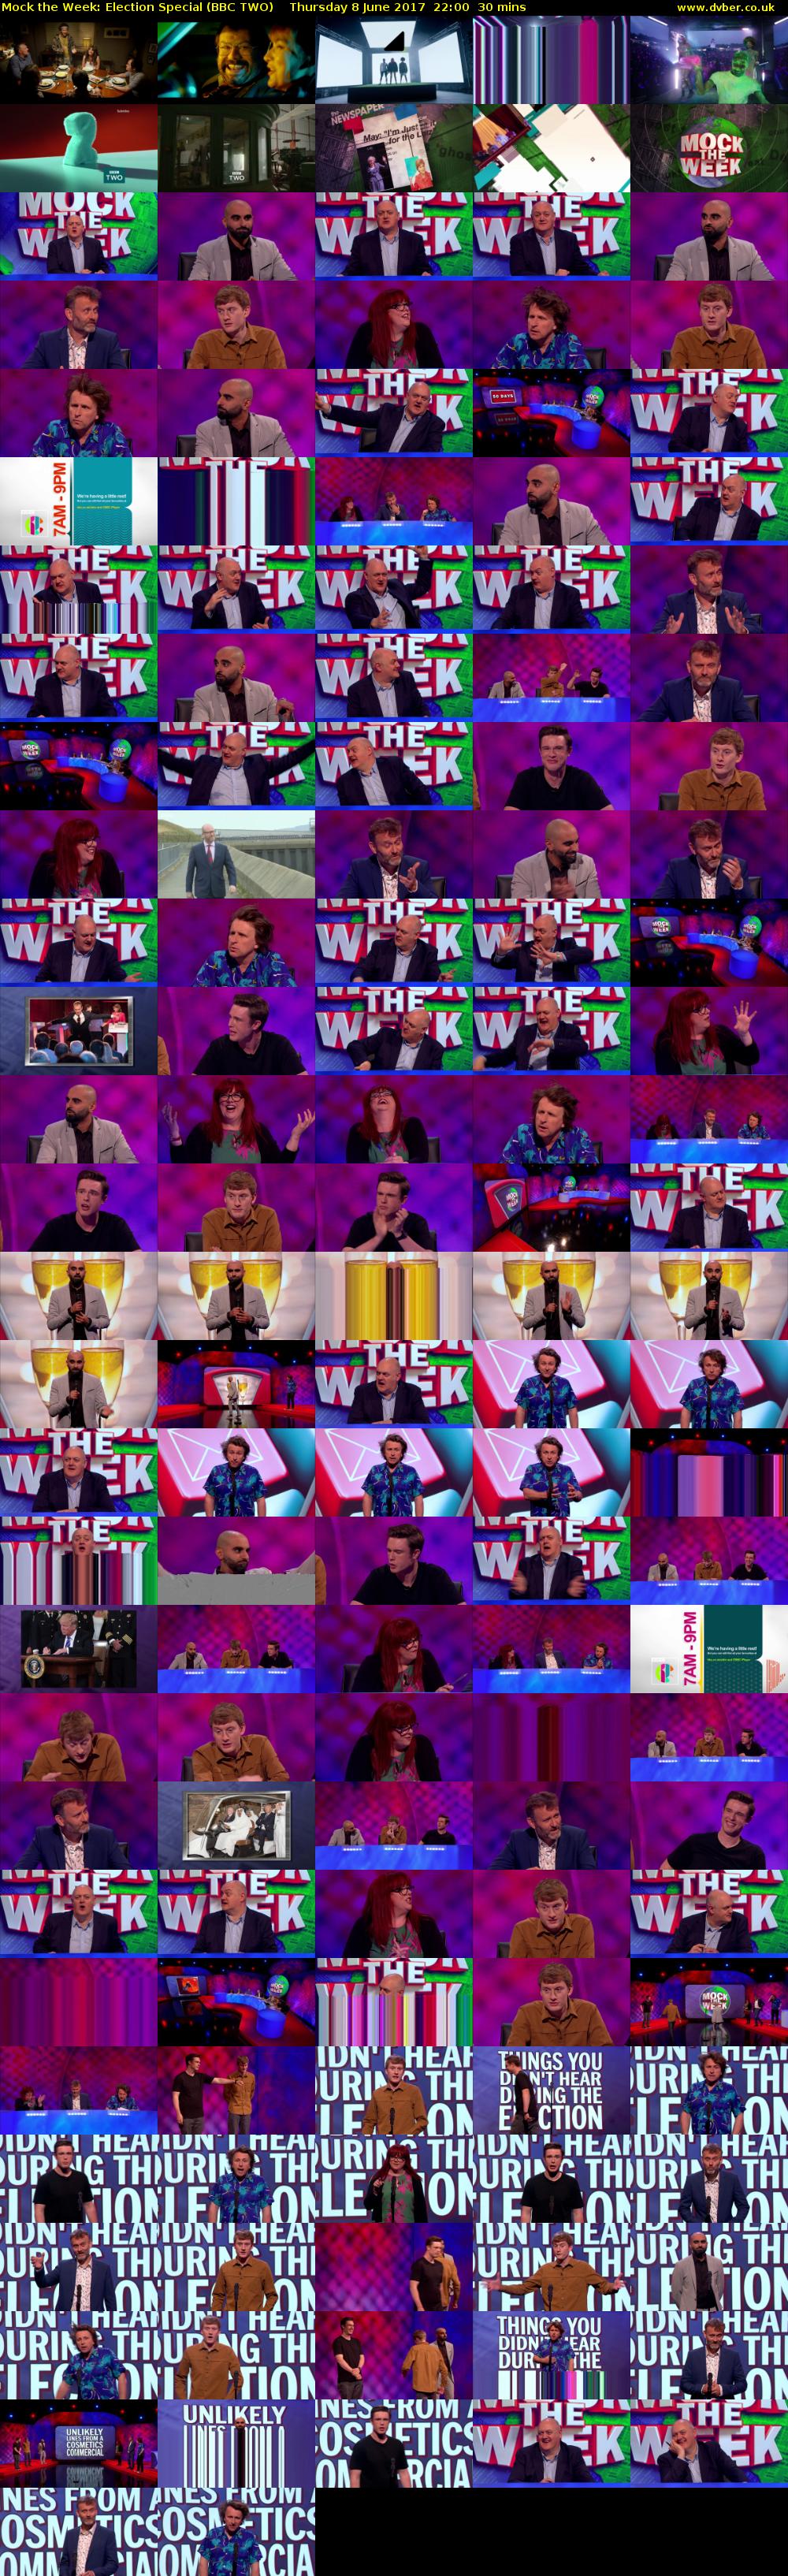 Mock the Week: Election Special (BBC TWO) Thursday 8 June 2017 22:00 - 22:30